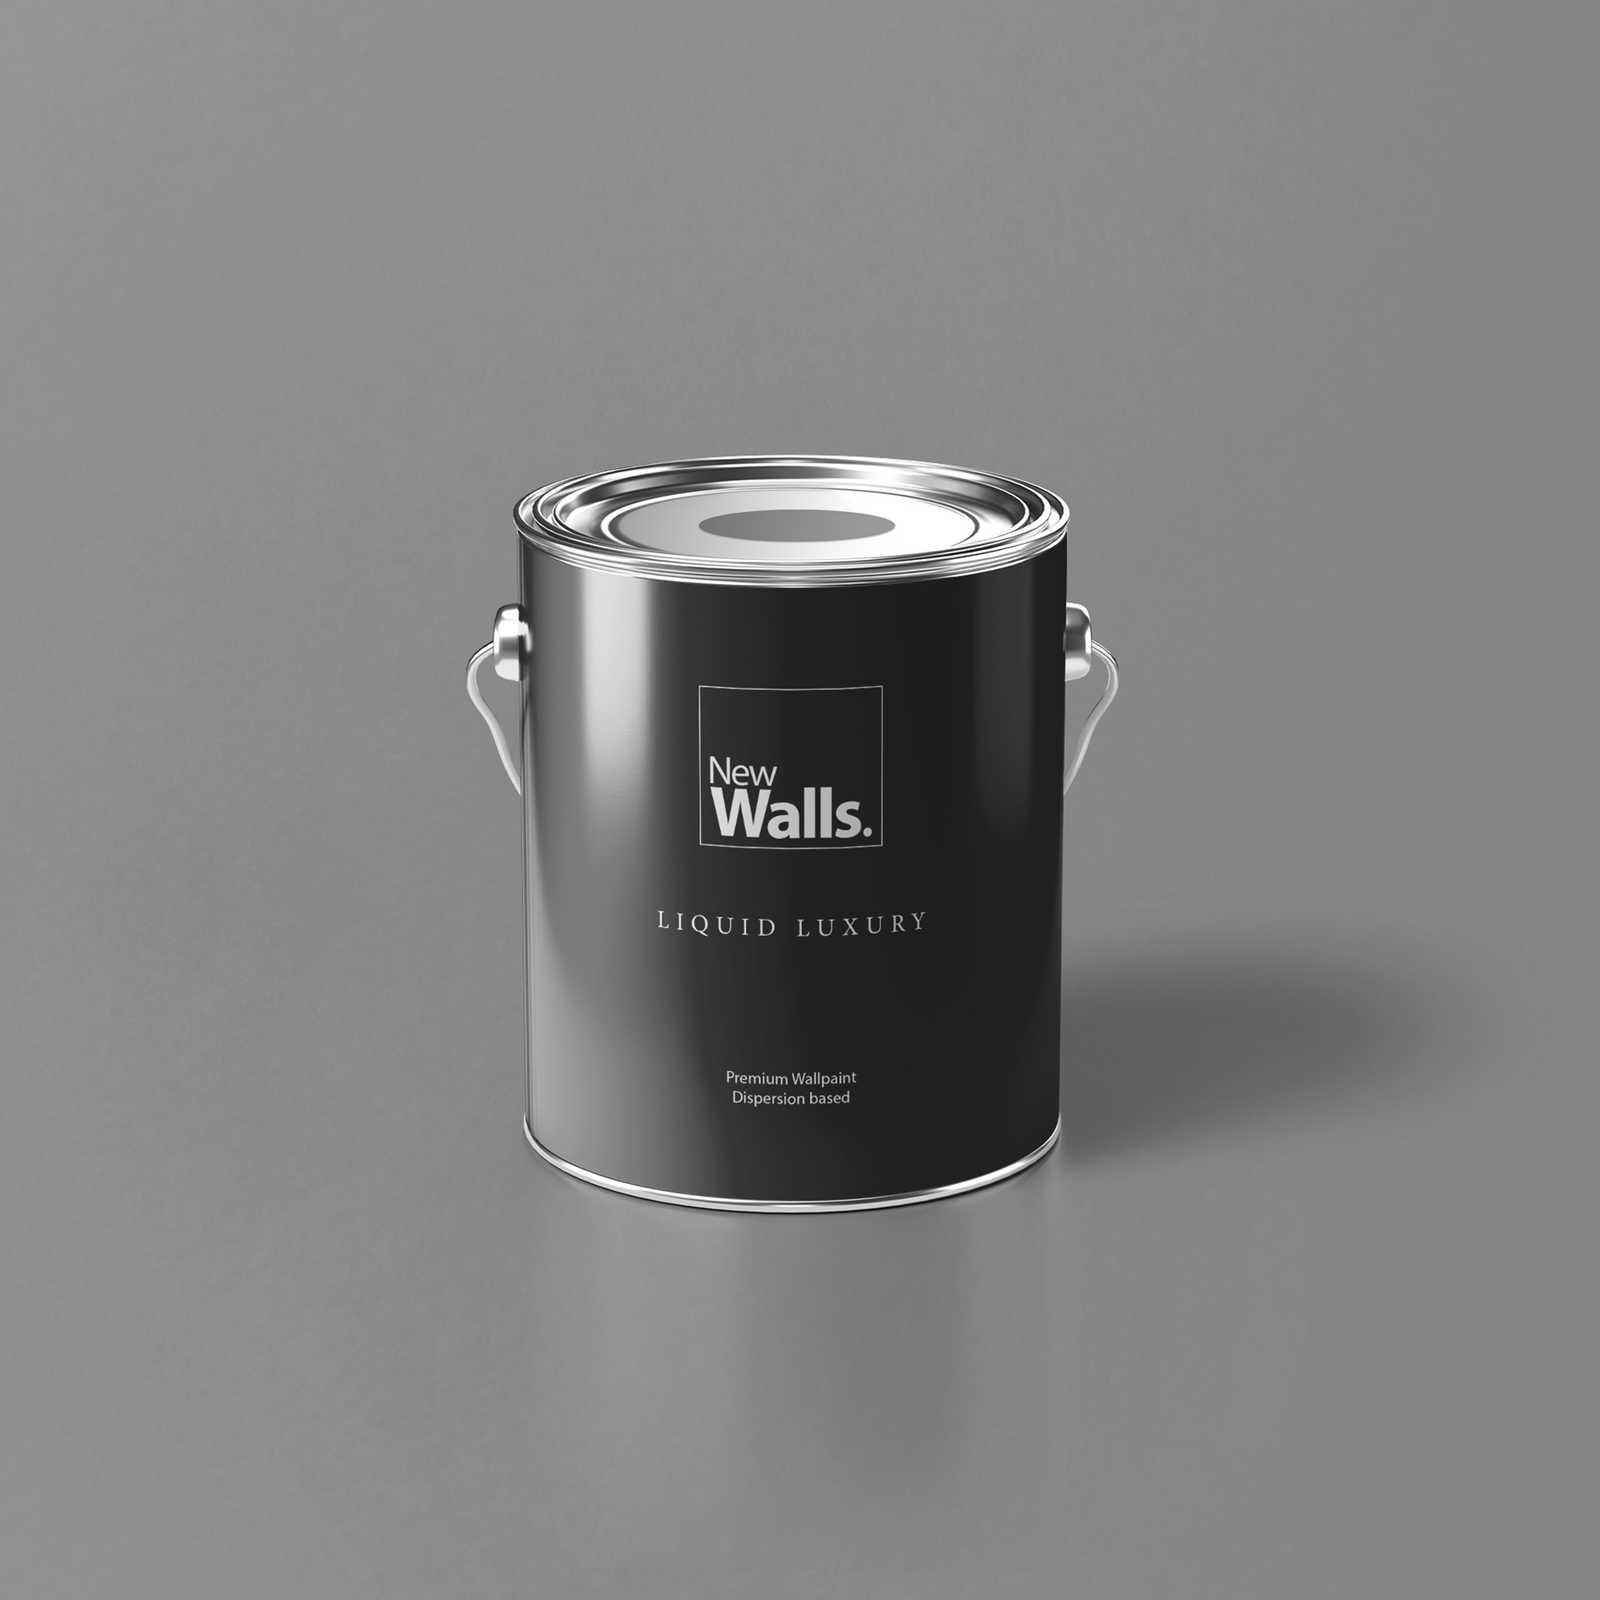 Premium Wall Paint Neutral Stone Grey »Industrial Grey« NW102 – 2.5 litre
